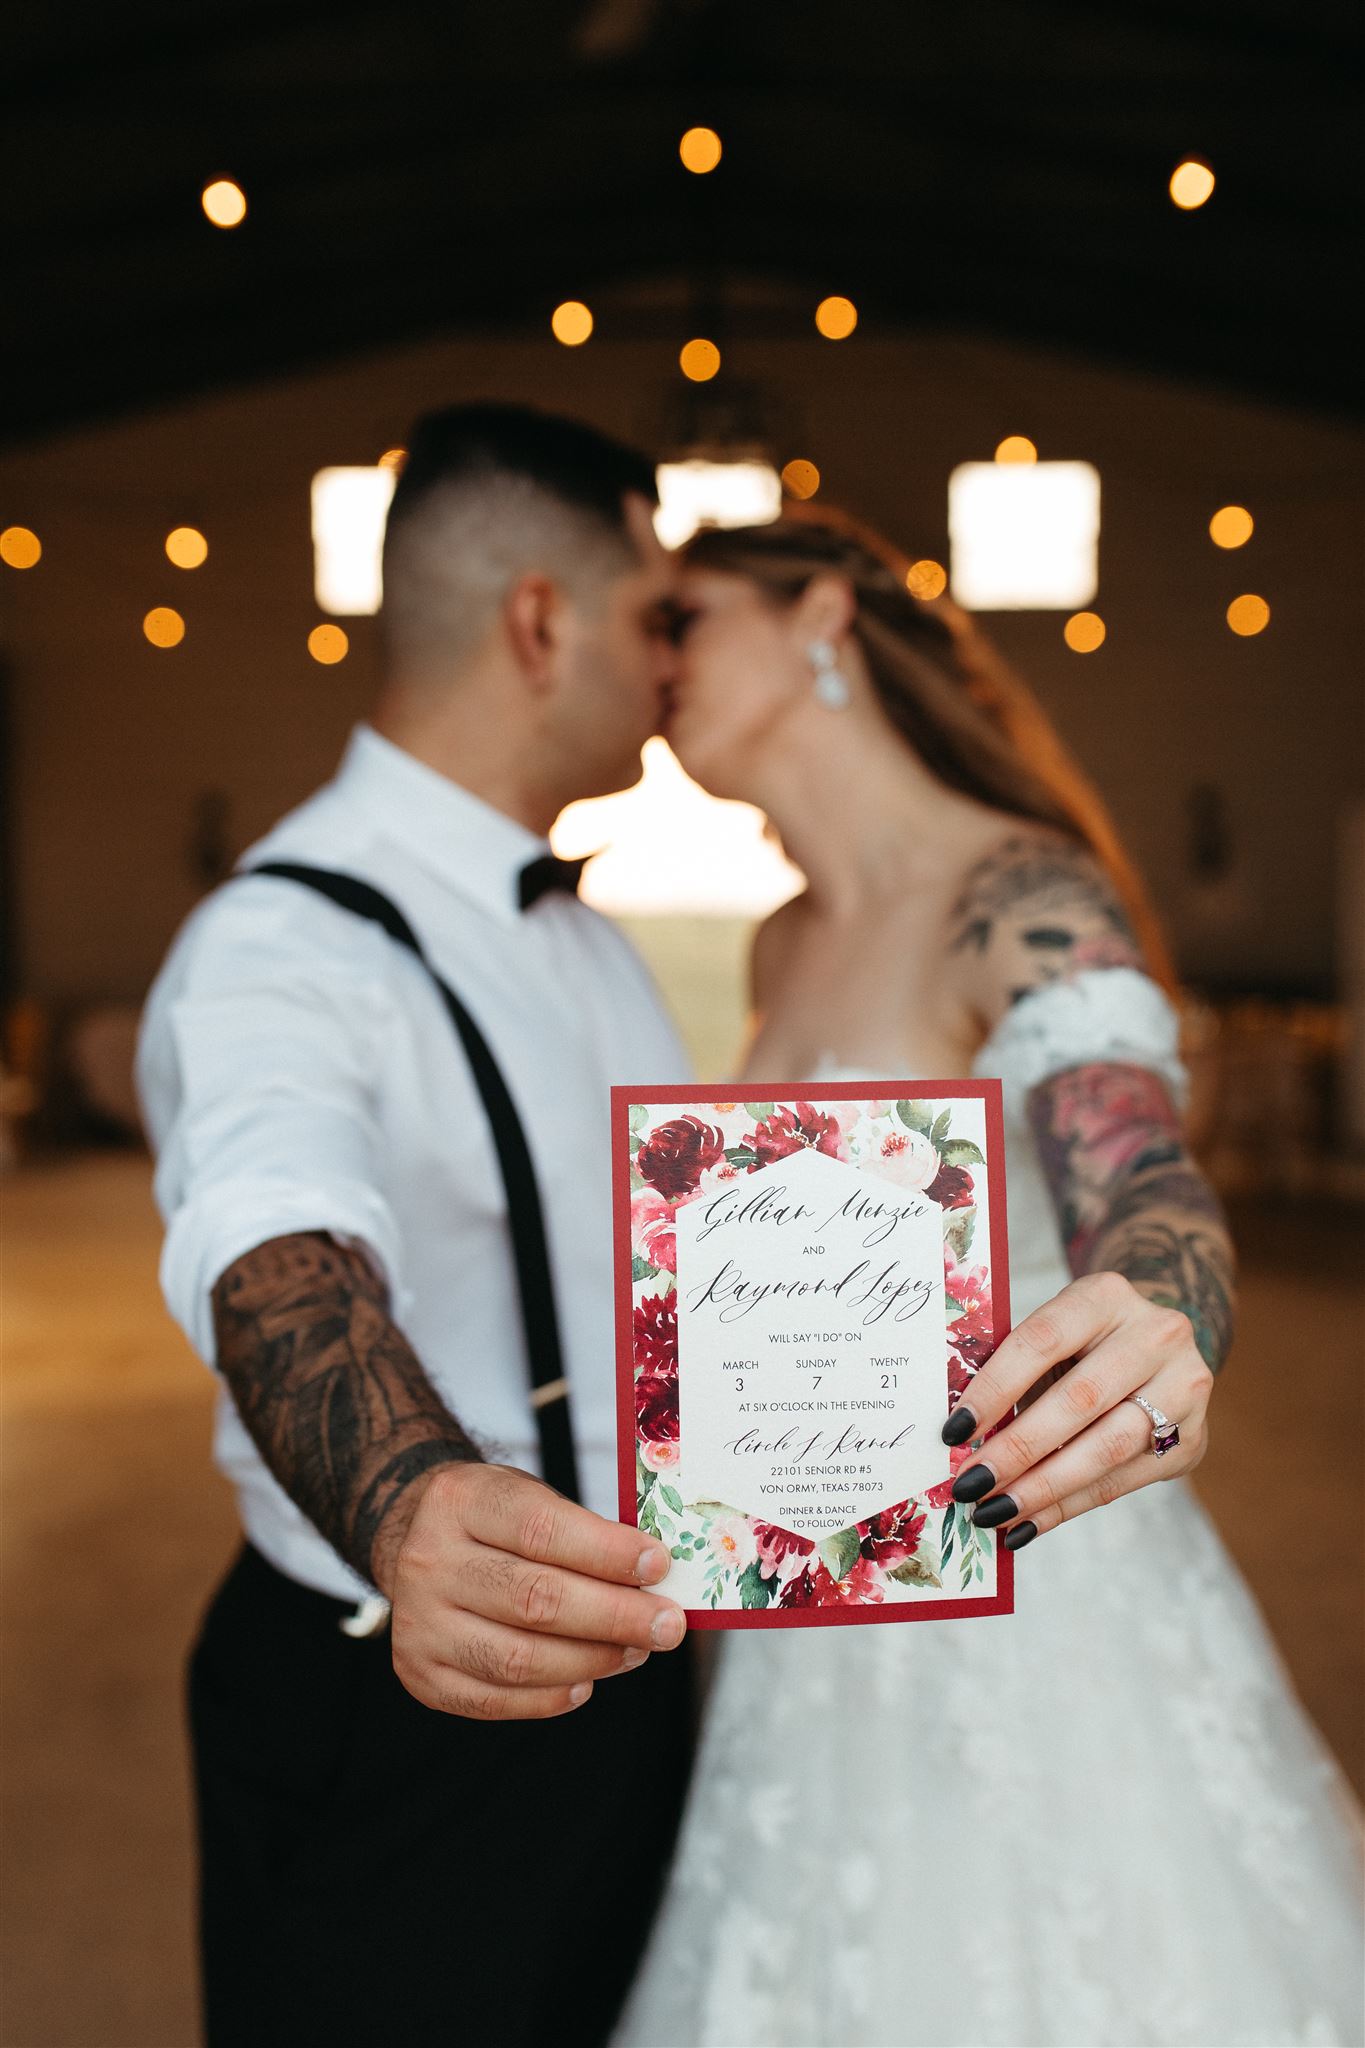 A bride and groom sharing a kiss while holding their San Antonio wedding invitation.